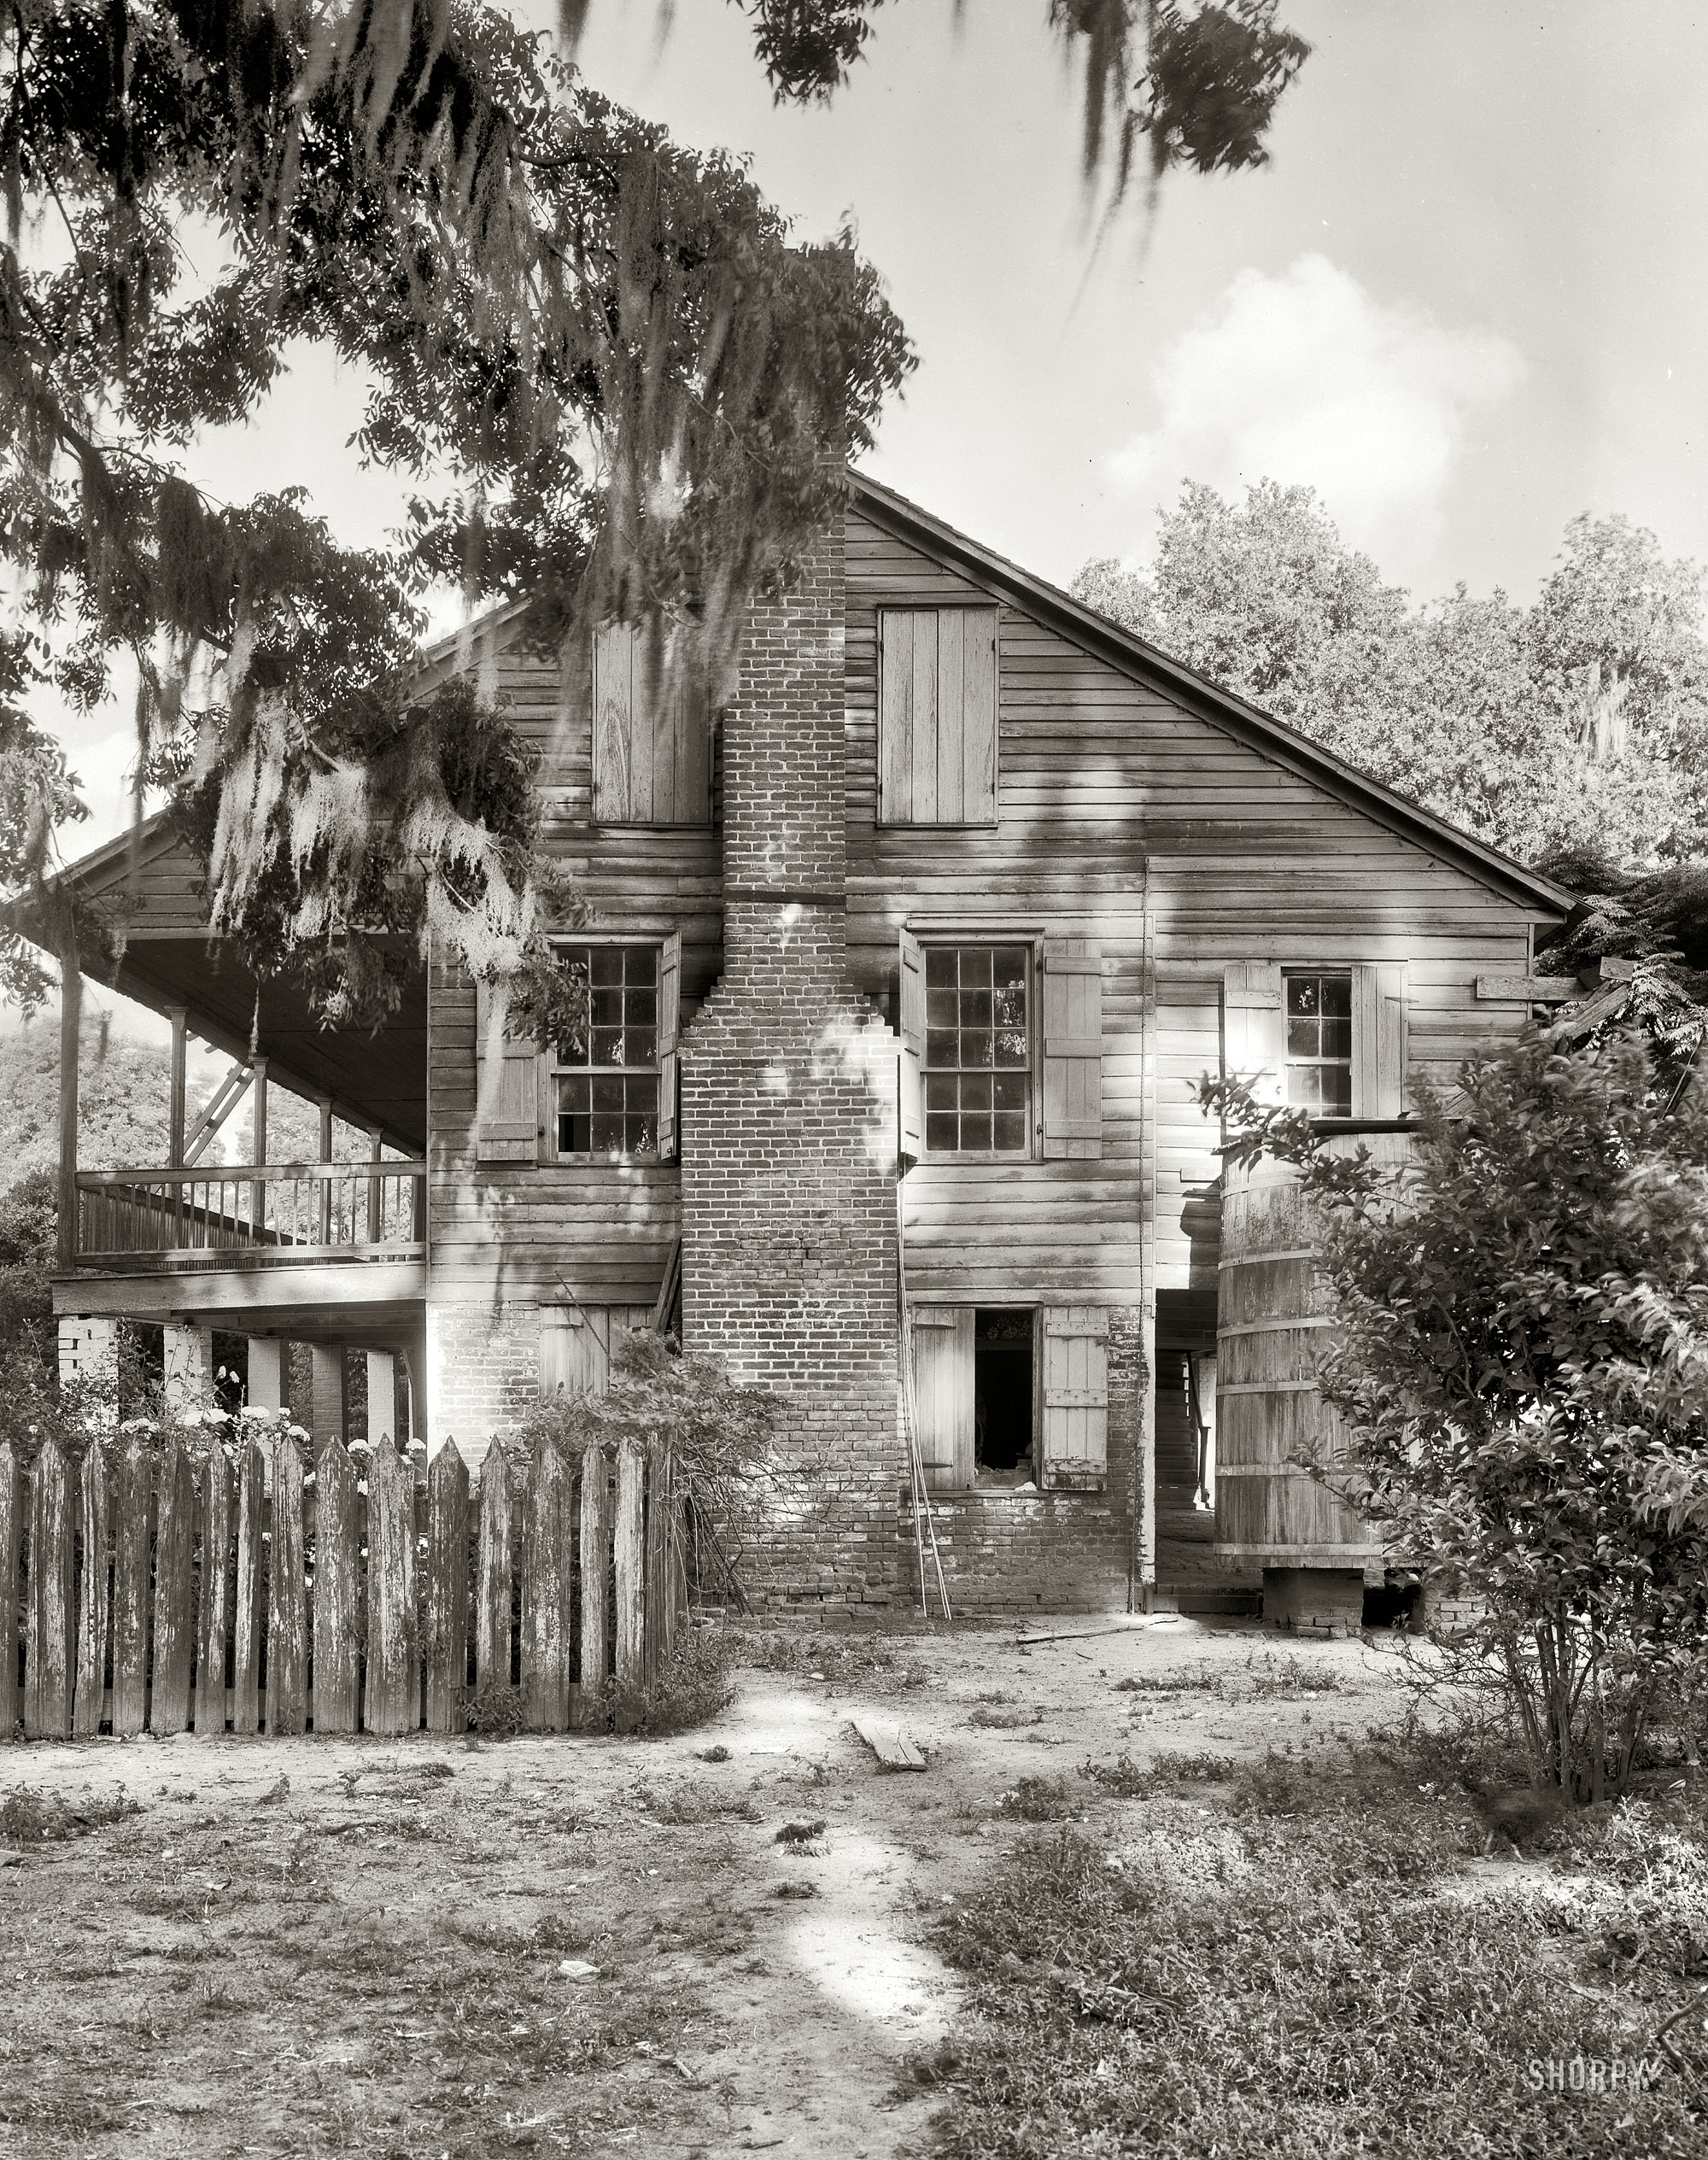 Louisiana circa 1938. "Bizette." 8x10 negative by Frances Benjamin Johnston for the Carnegie Survey of the Architecture of the South. View full size.